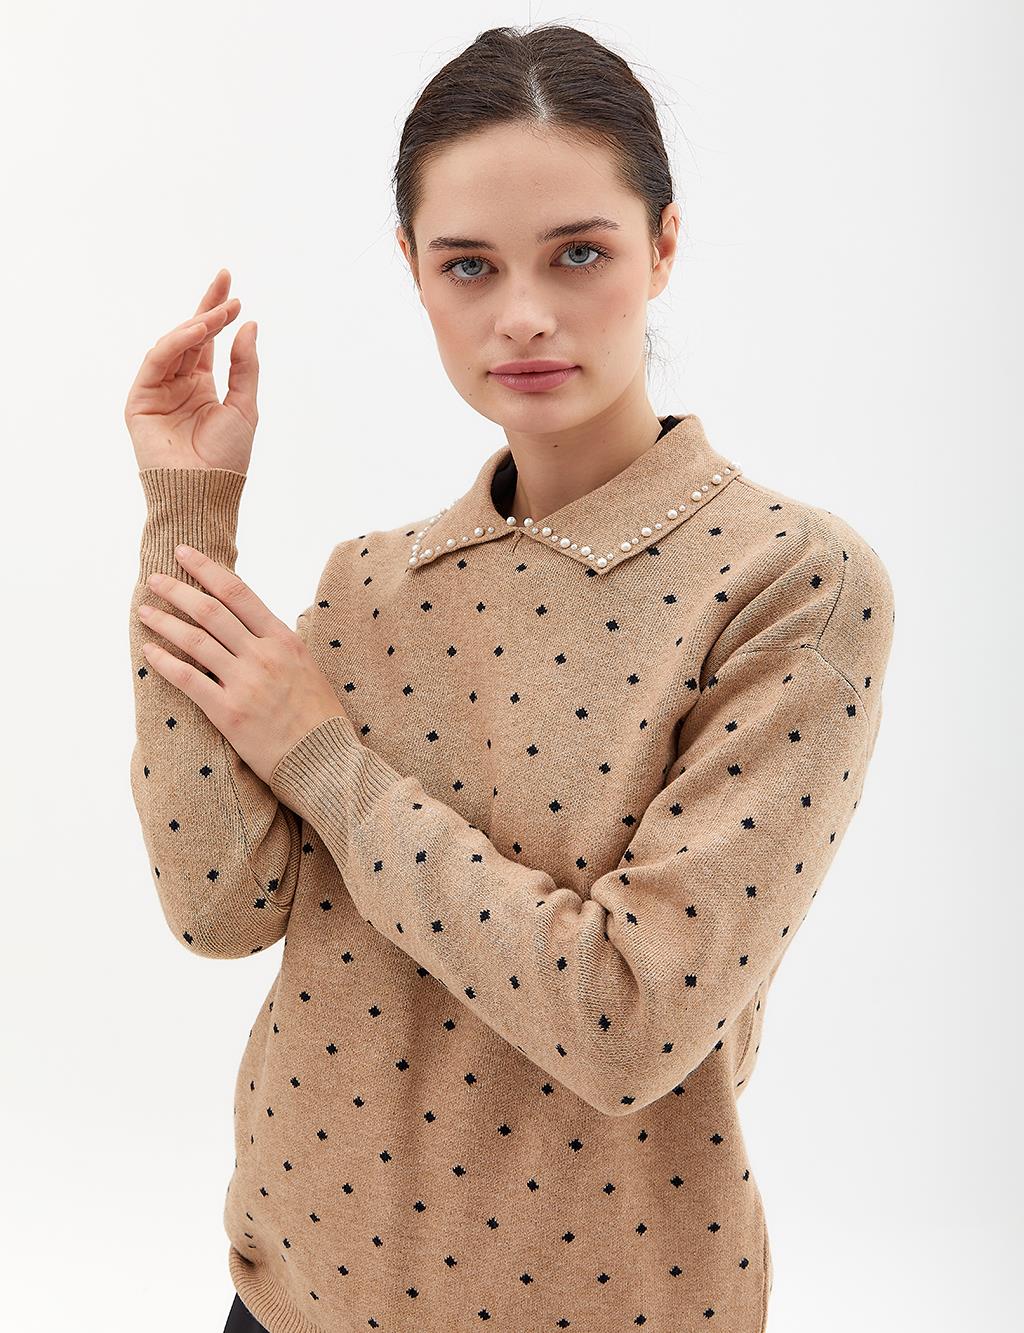 Polka Dot Bead Embroidered Knitwear Blouse Beige Navy Blue